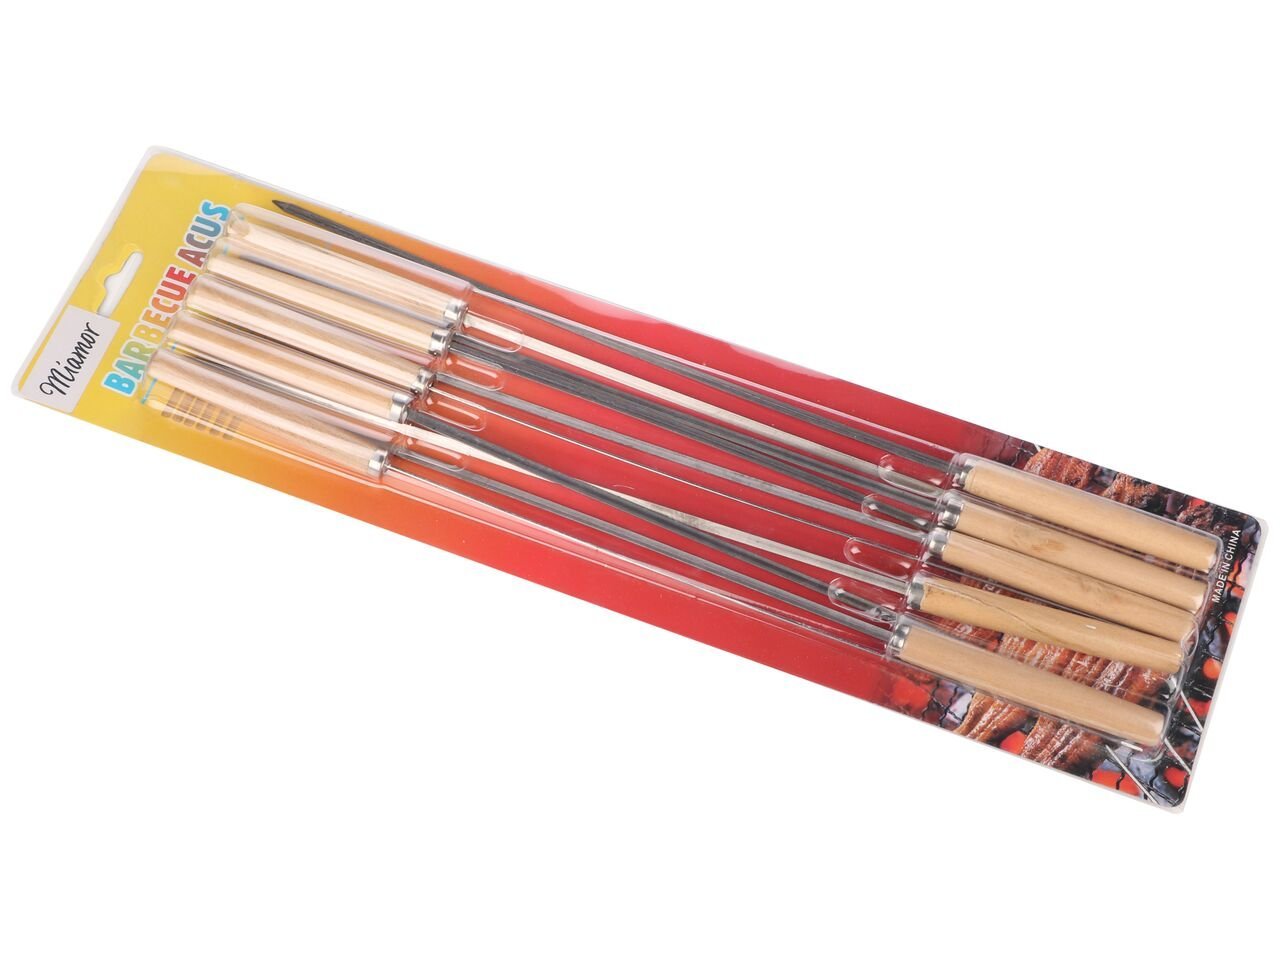 Miamour Barbeque Skewer Set (Multicolour, 10-Pieces, Metal) at Rs 119 only